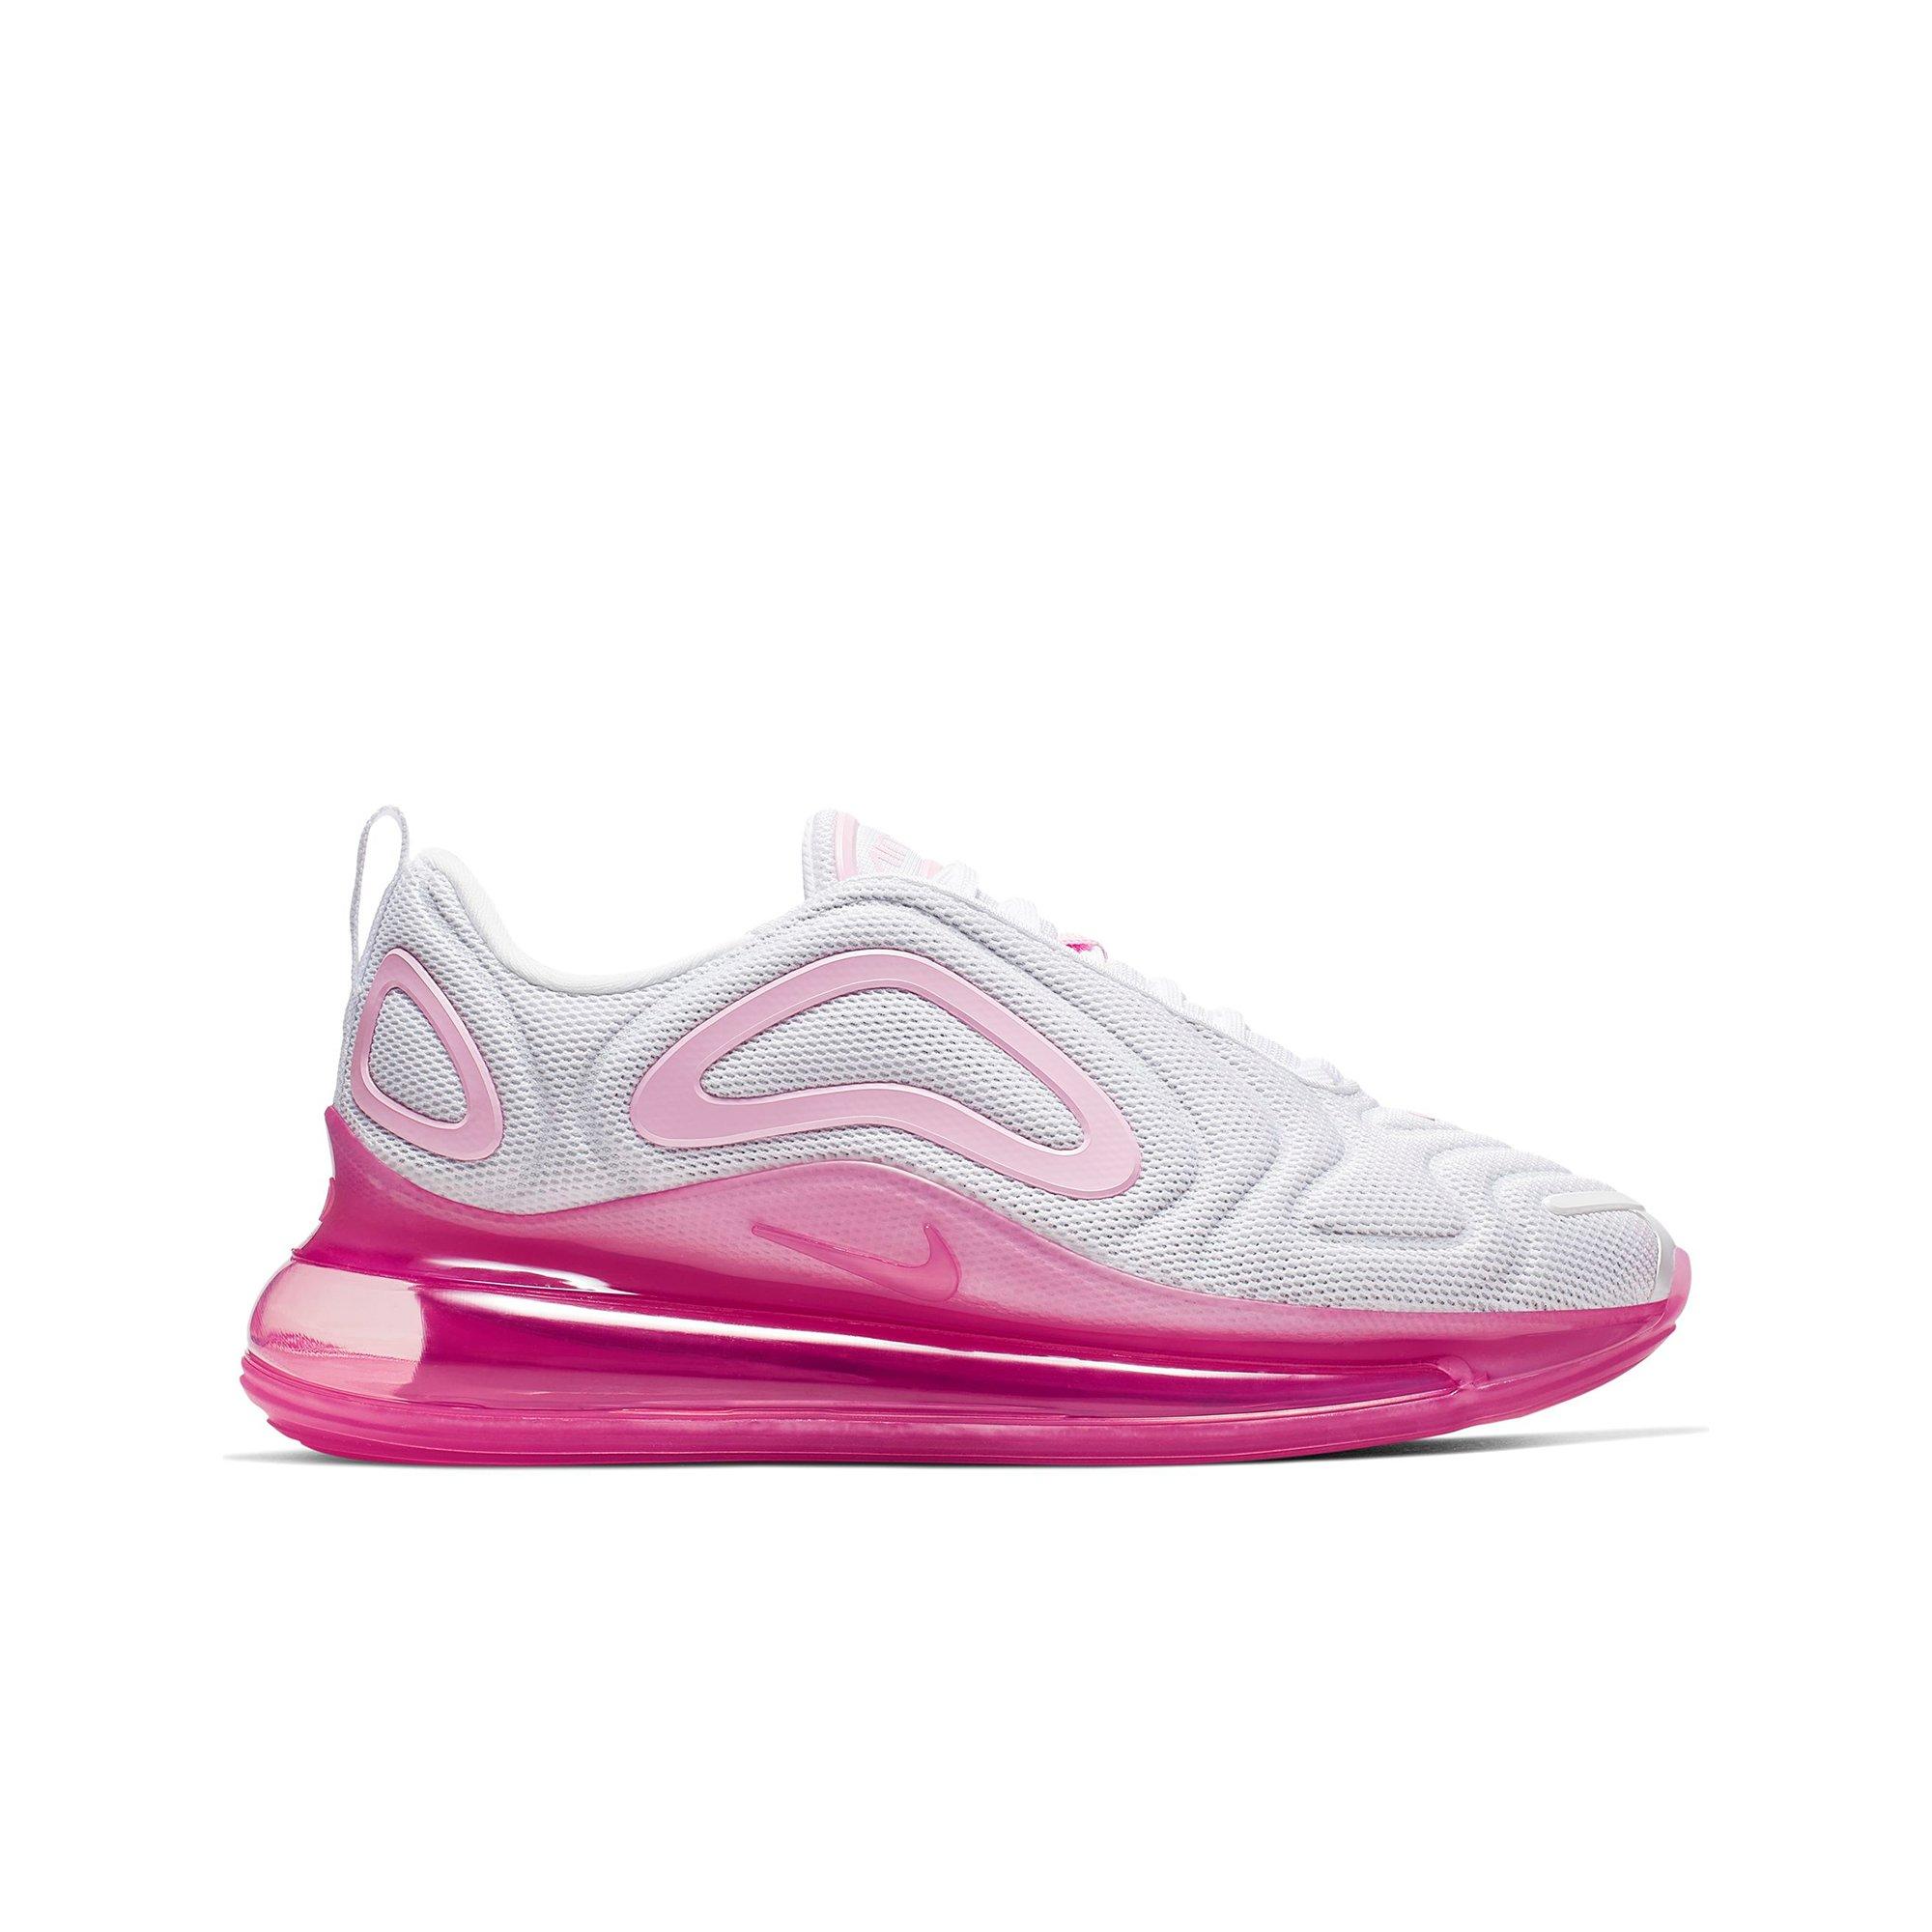 air max 720 pink and white